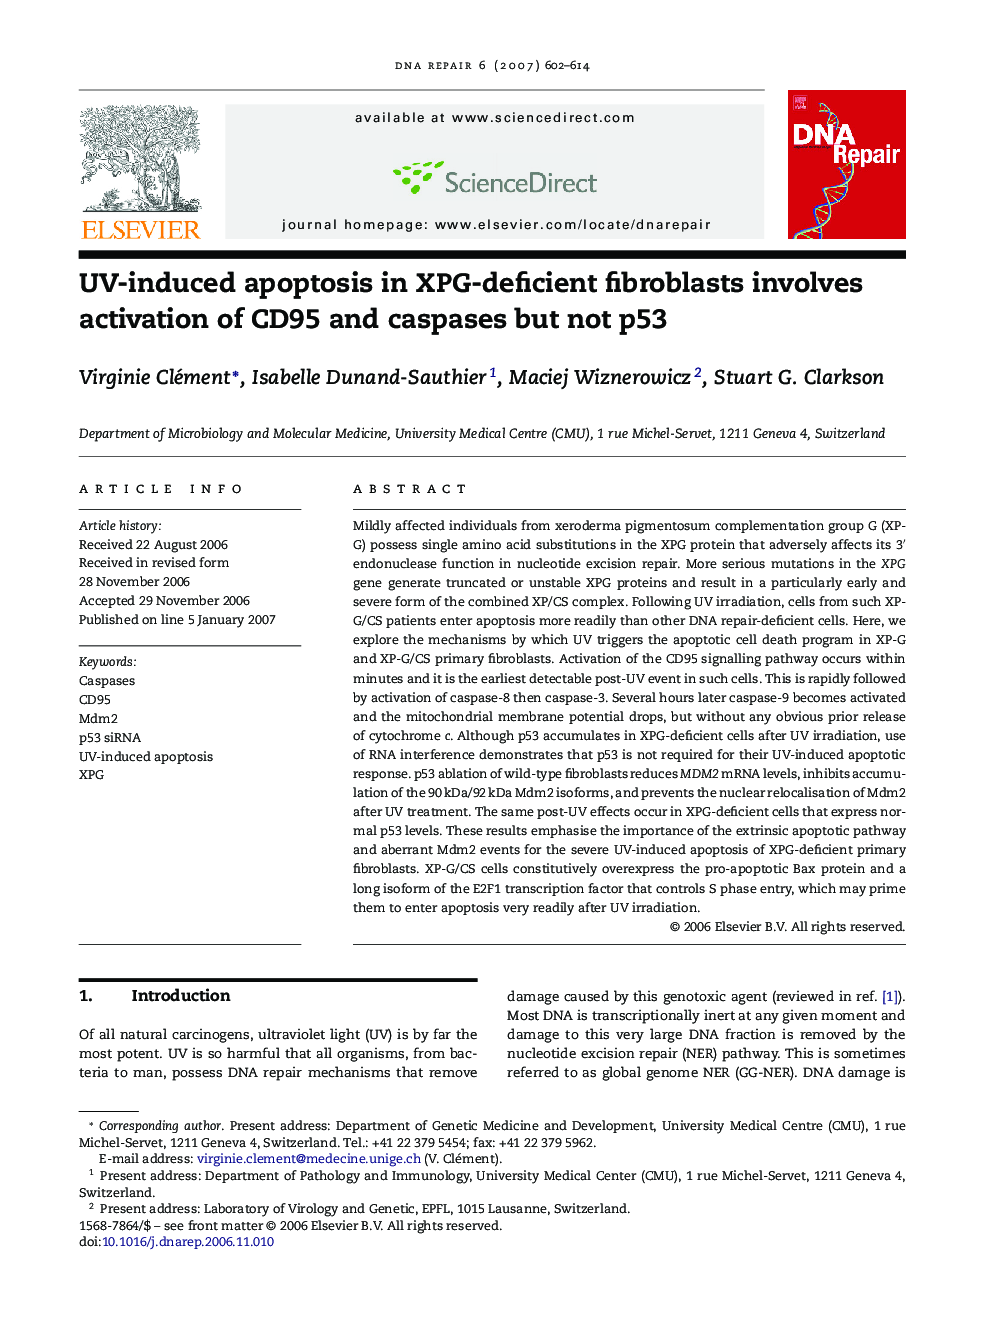 UV-induced apoptosis in XPG-deficient fibroblasts involves activation of CD95 and caspases but not p53